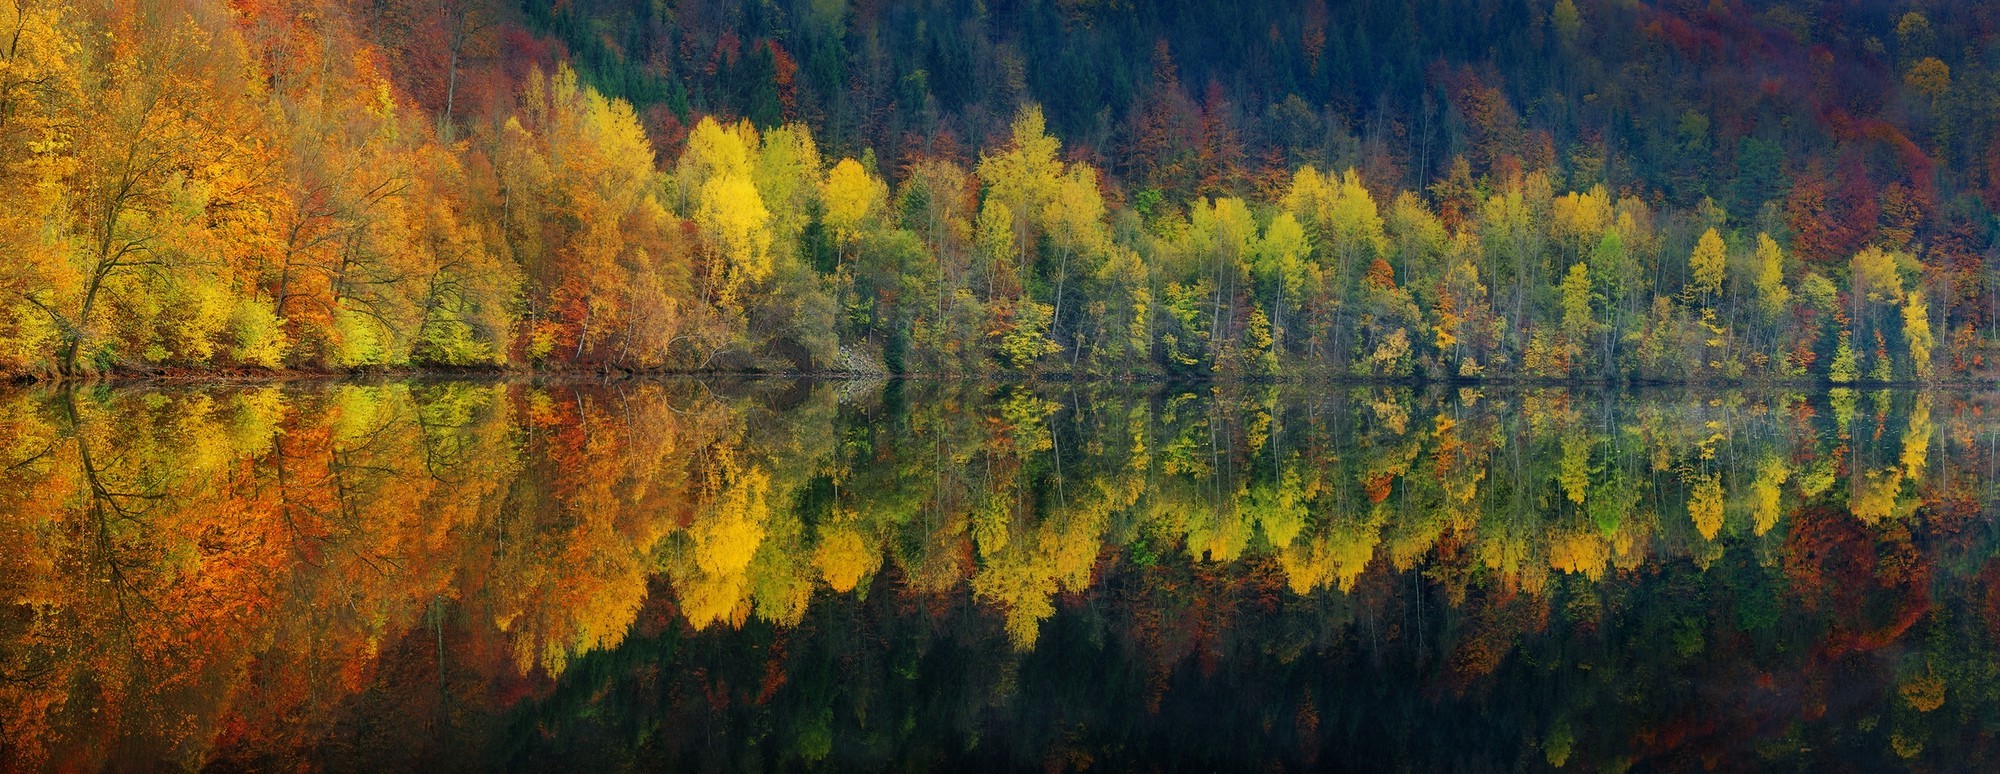 panoramas, Lake, Reflection, Nature, Fall, Water, Forest, Landscape ...